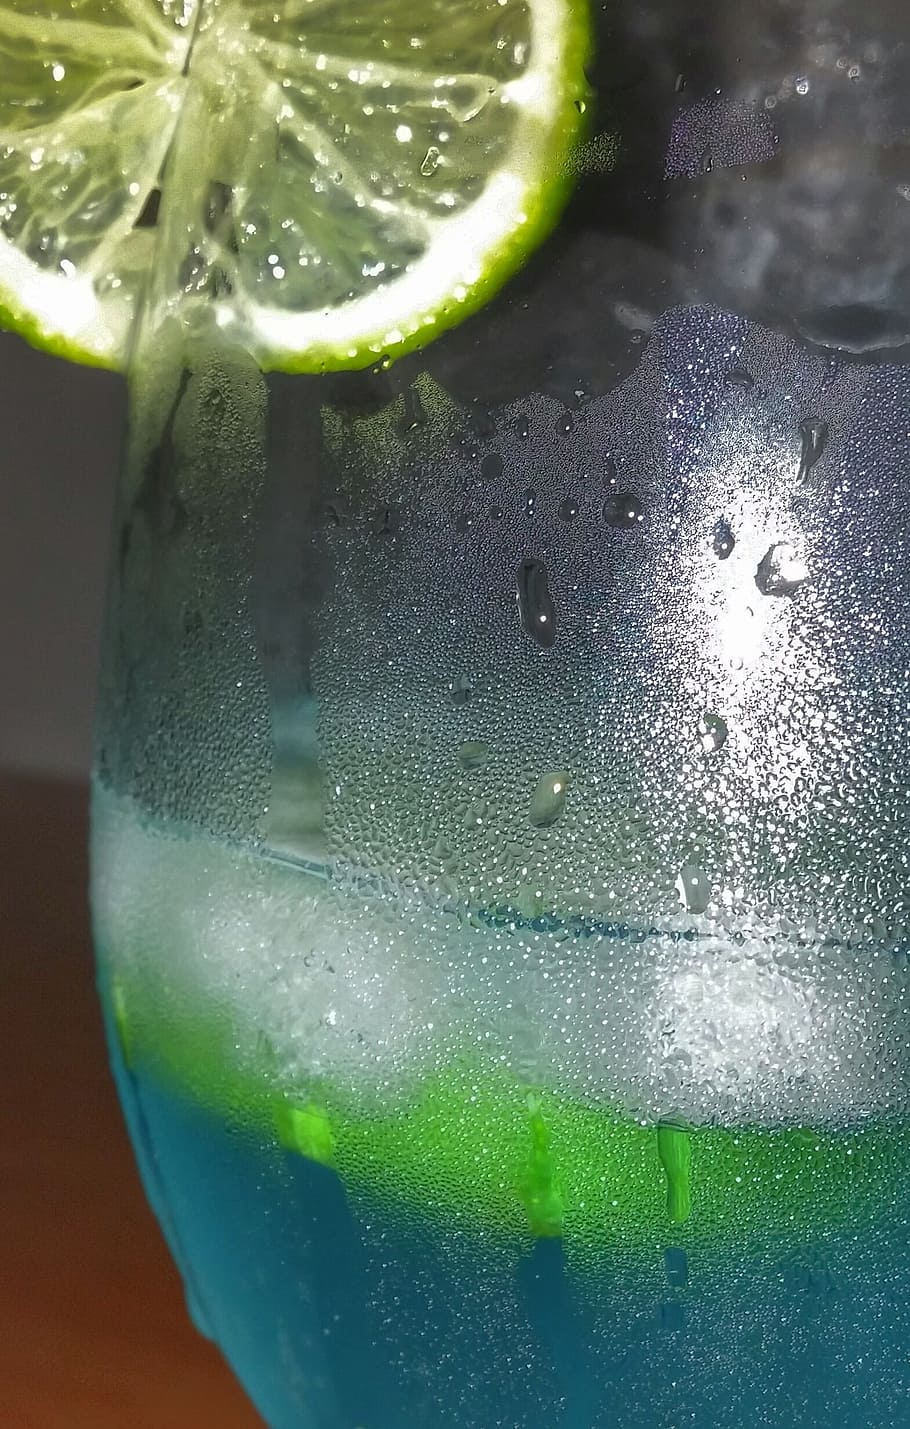 gin, tonic, lime, green, blue, cold, food and drink, drink, close-up, refreshment